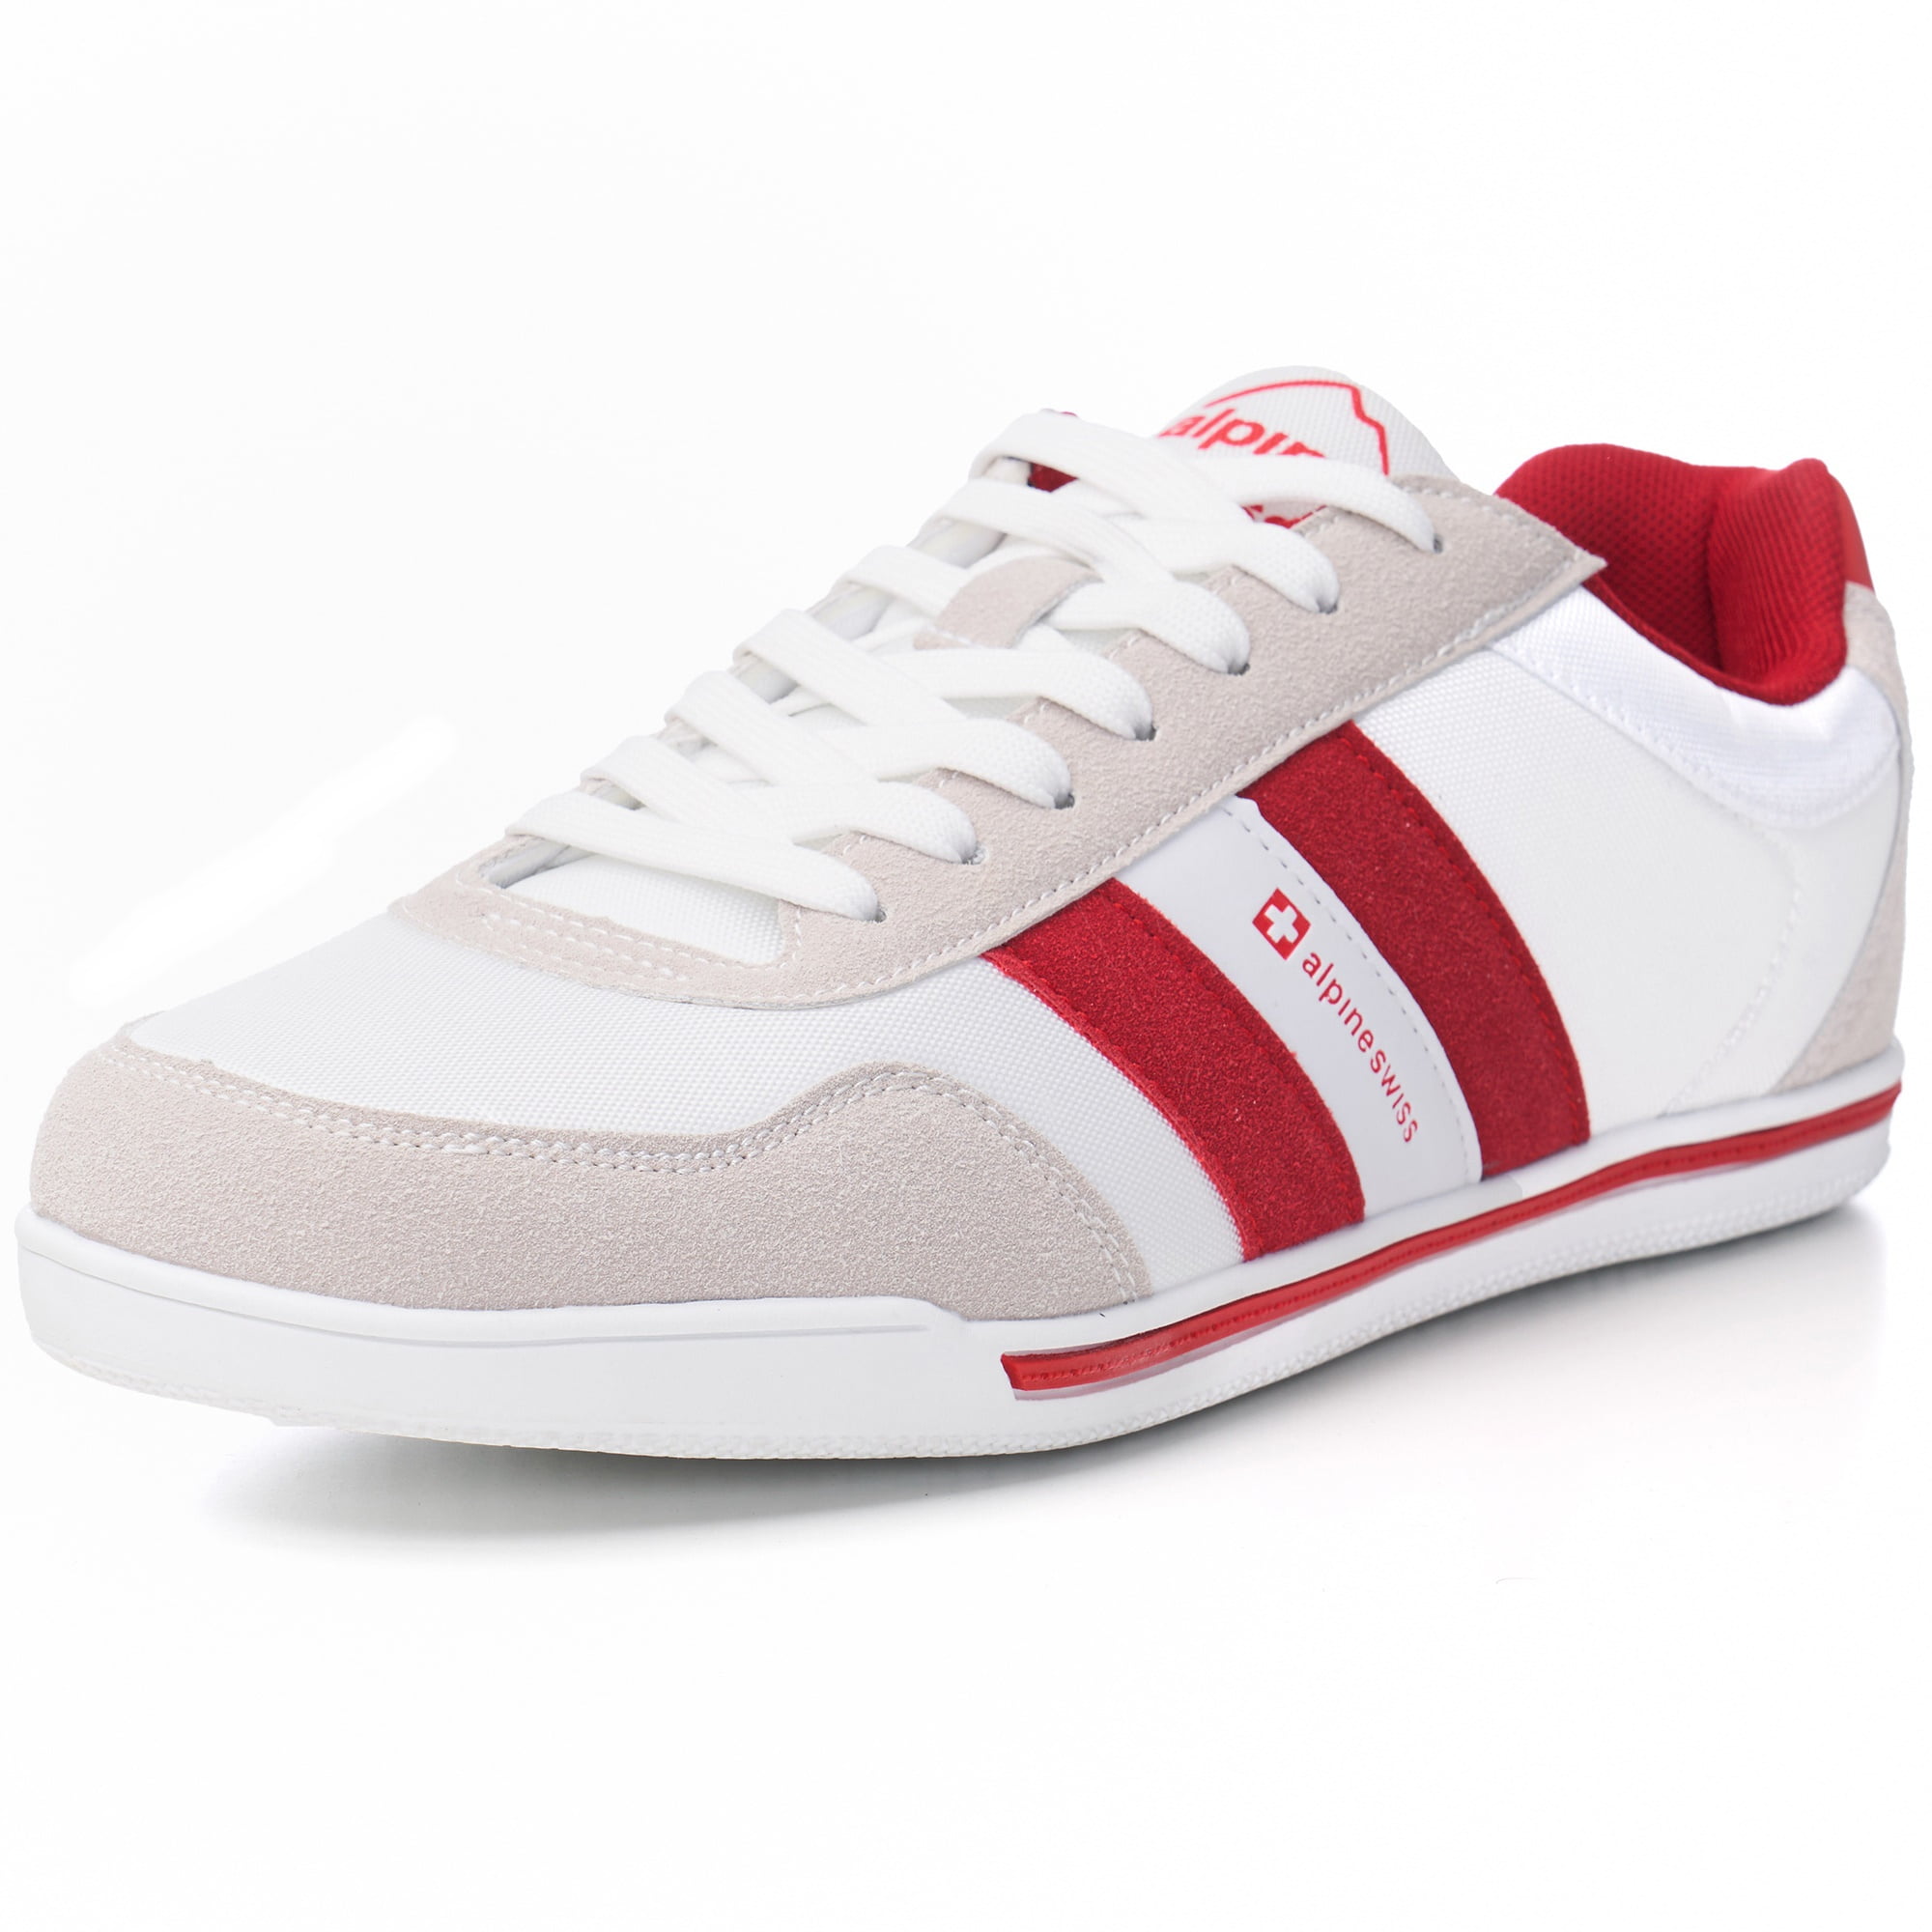 swiss athletic shoes